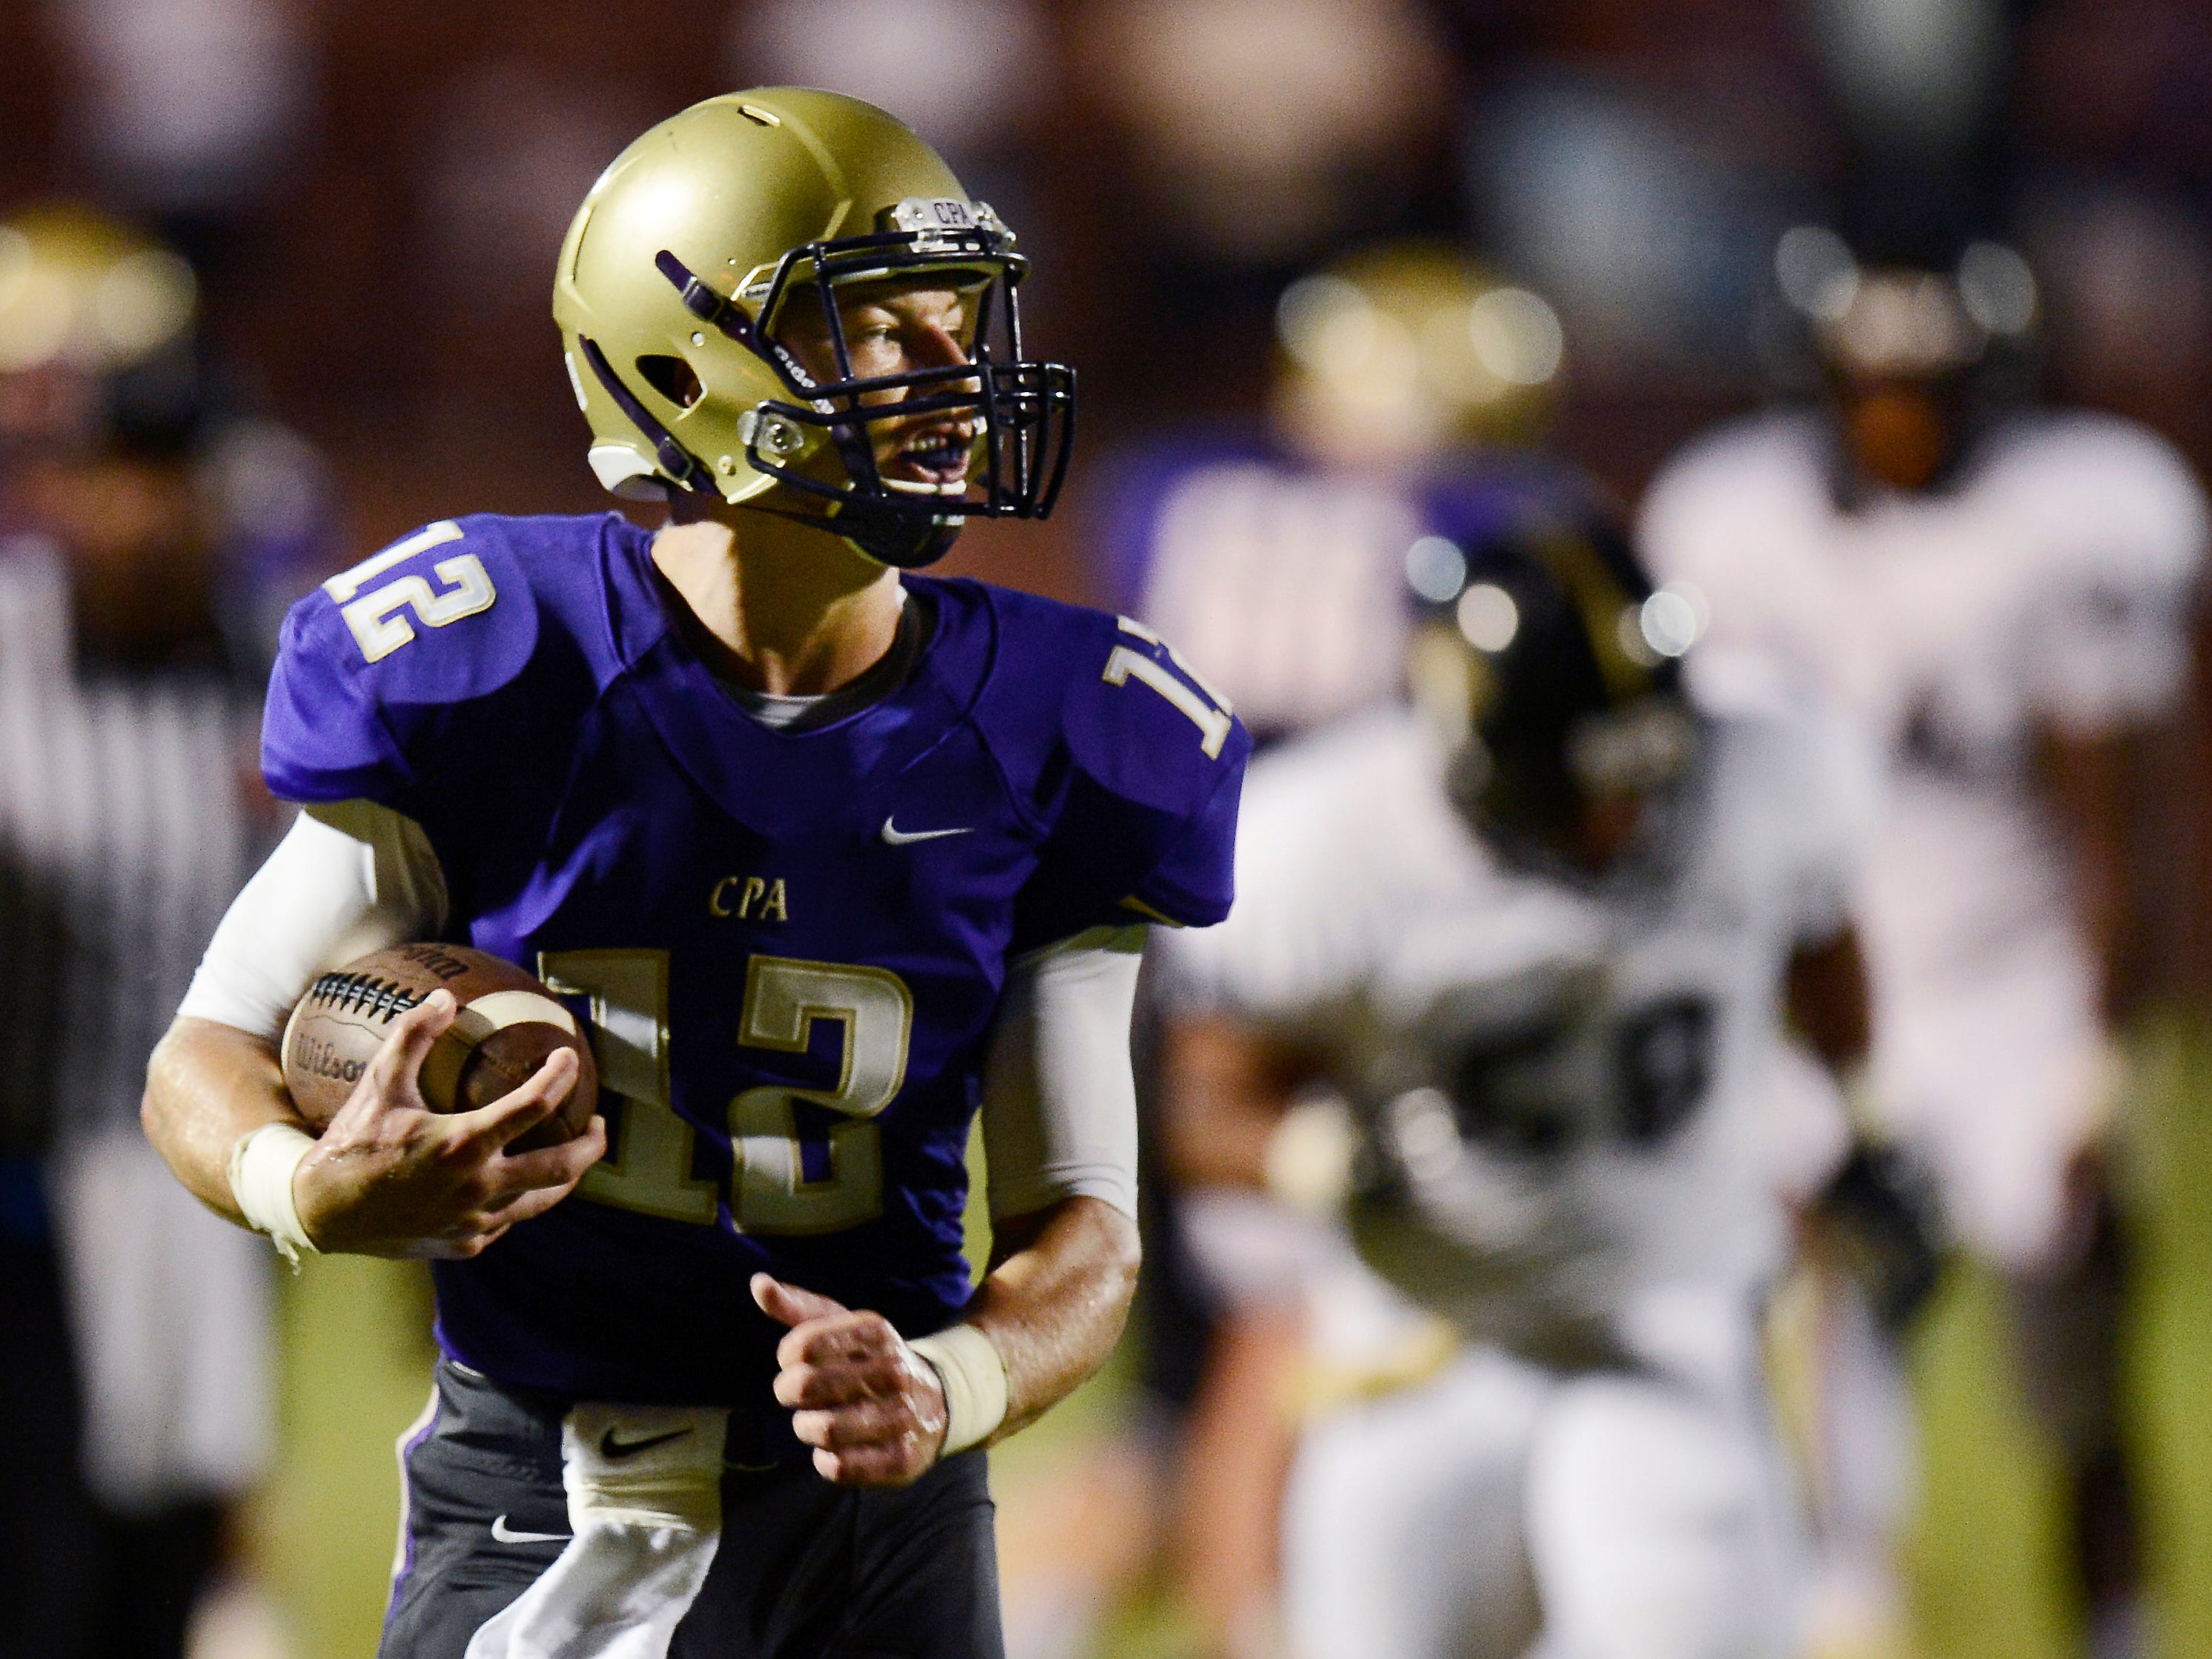 CPA quarterback Jay Hockaday (12) runs for a touchdown against Giles County earlier in the season. The Lions are unbeaten heading into Friday’s matchup against Marshall County.